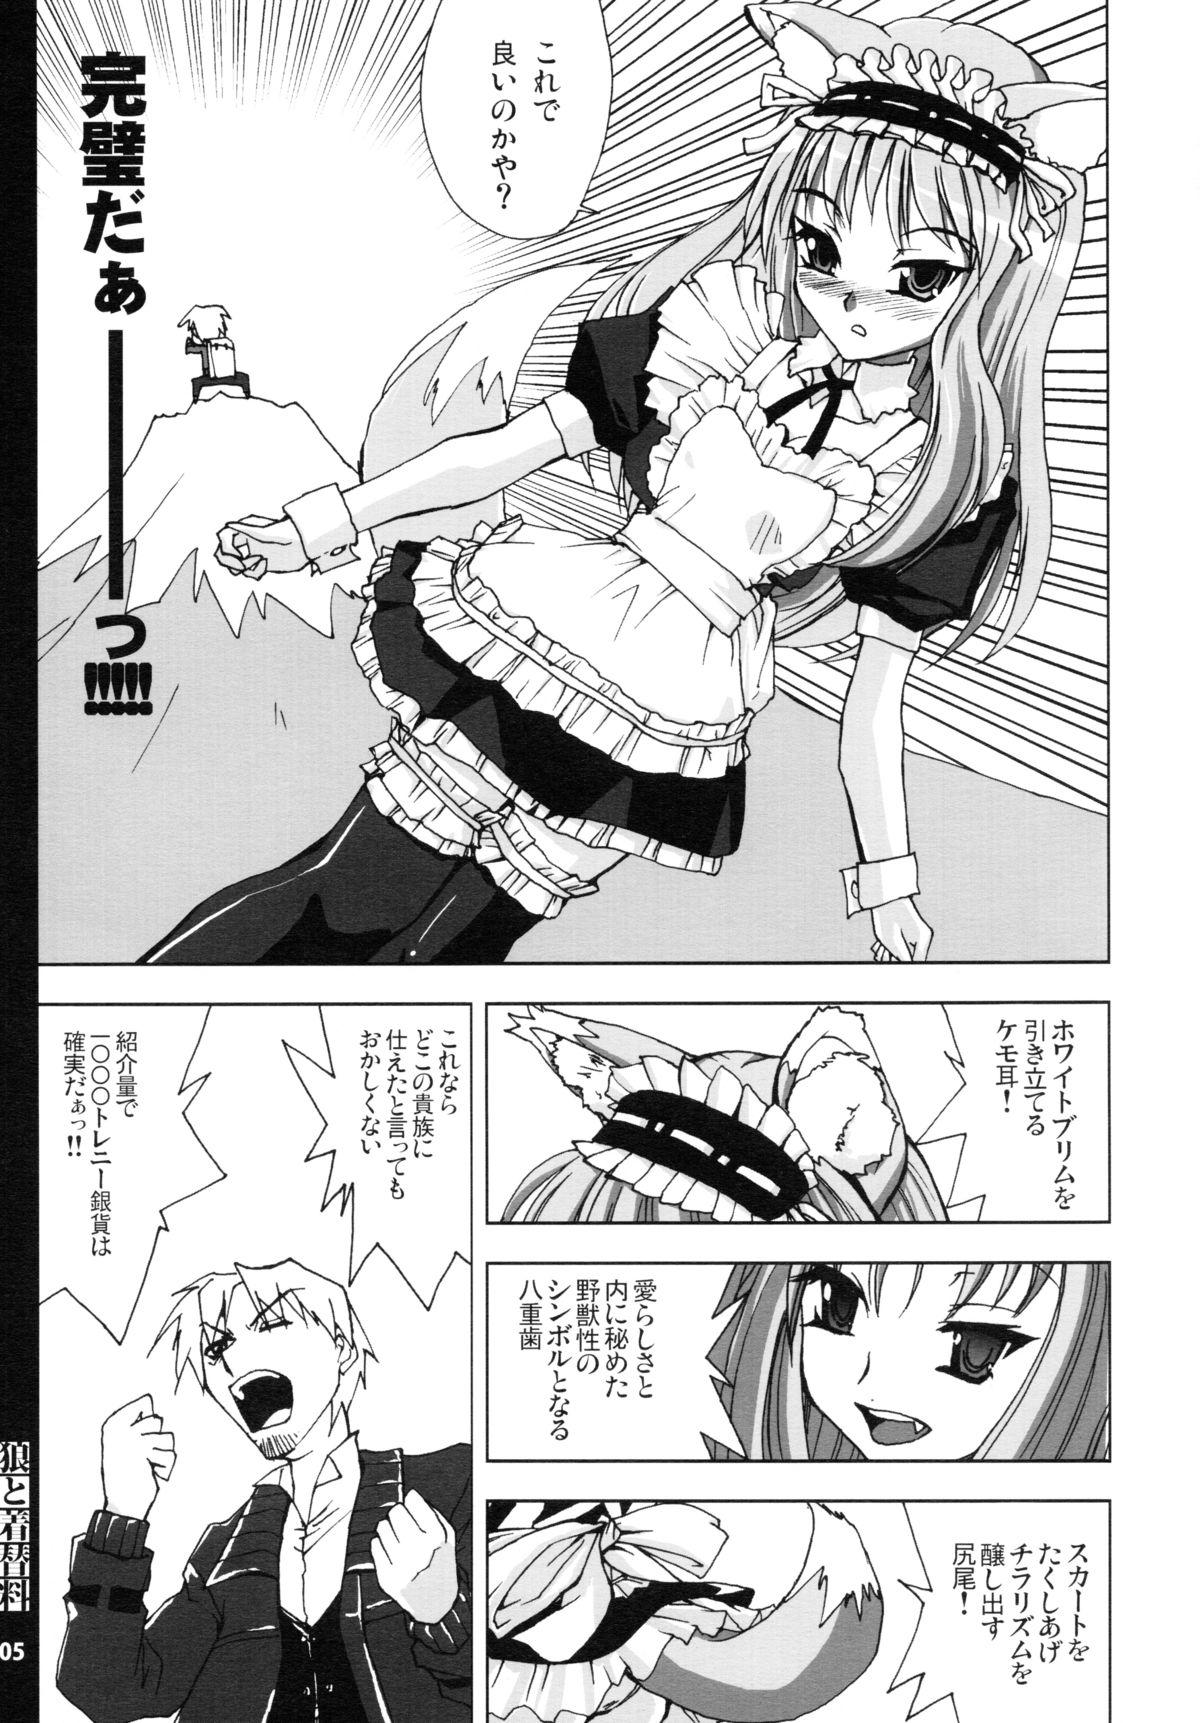 No Condom Ookami to Cosplay-ryou - Spice and wolf Cock Suck - Page 5